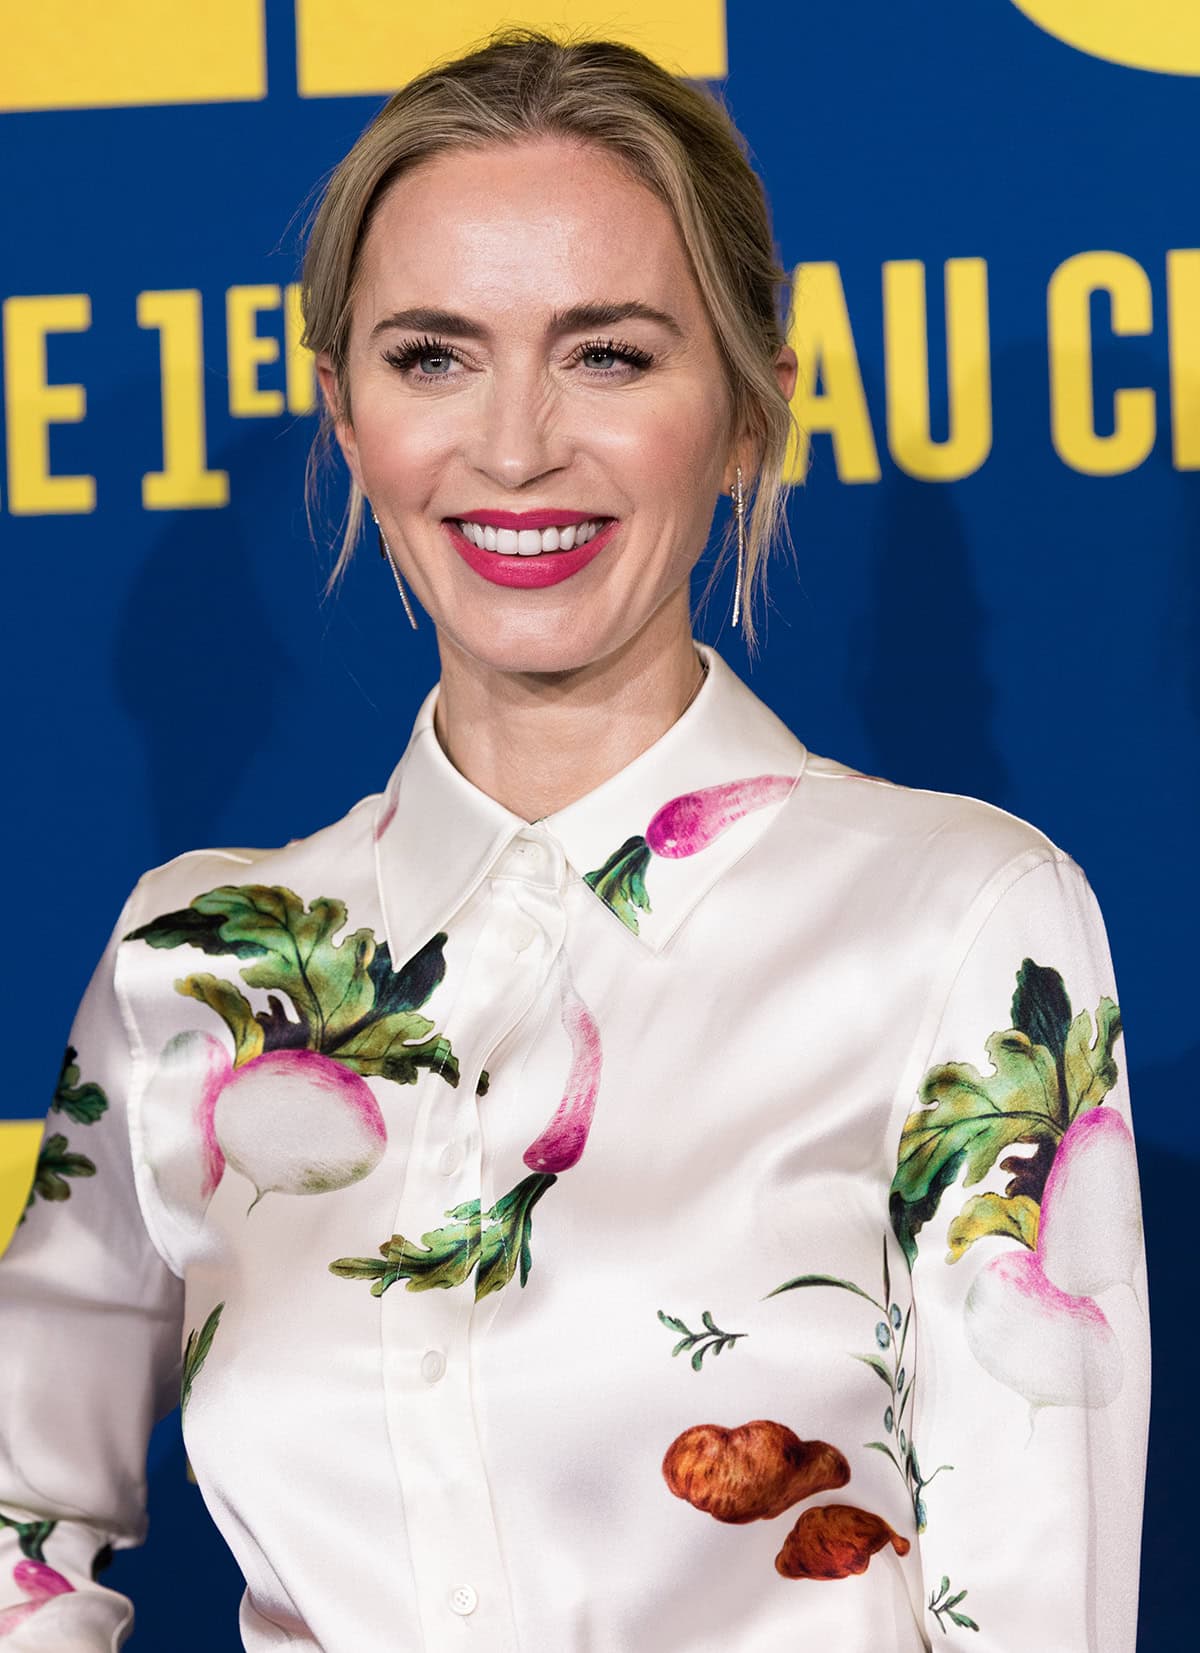 Emily Blunt teams her playful outfit with elegant Tiffany & Co. dangling earrings and Taylor Swift's friendship bracelets